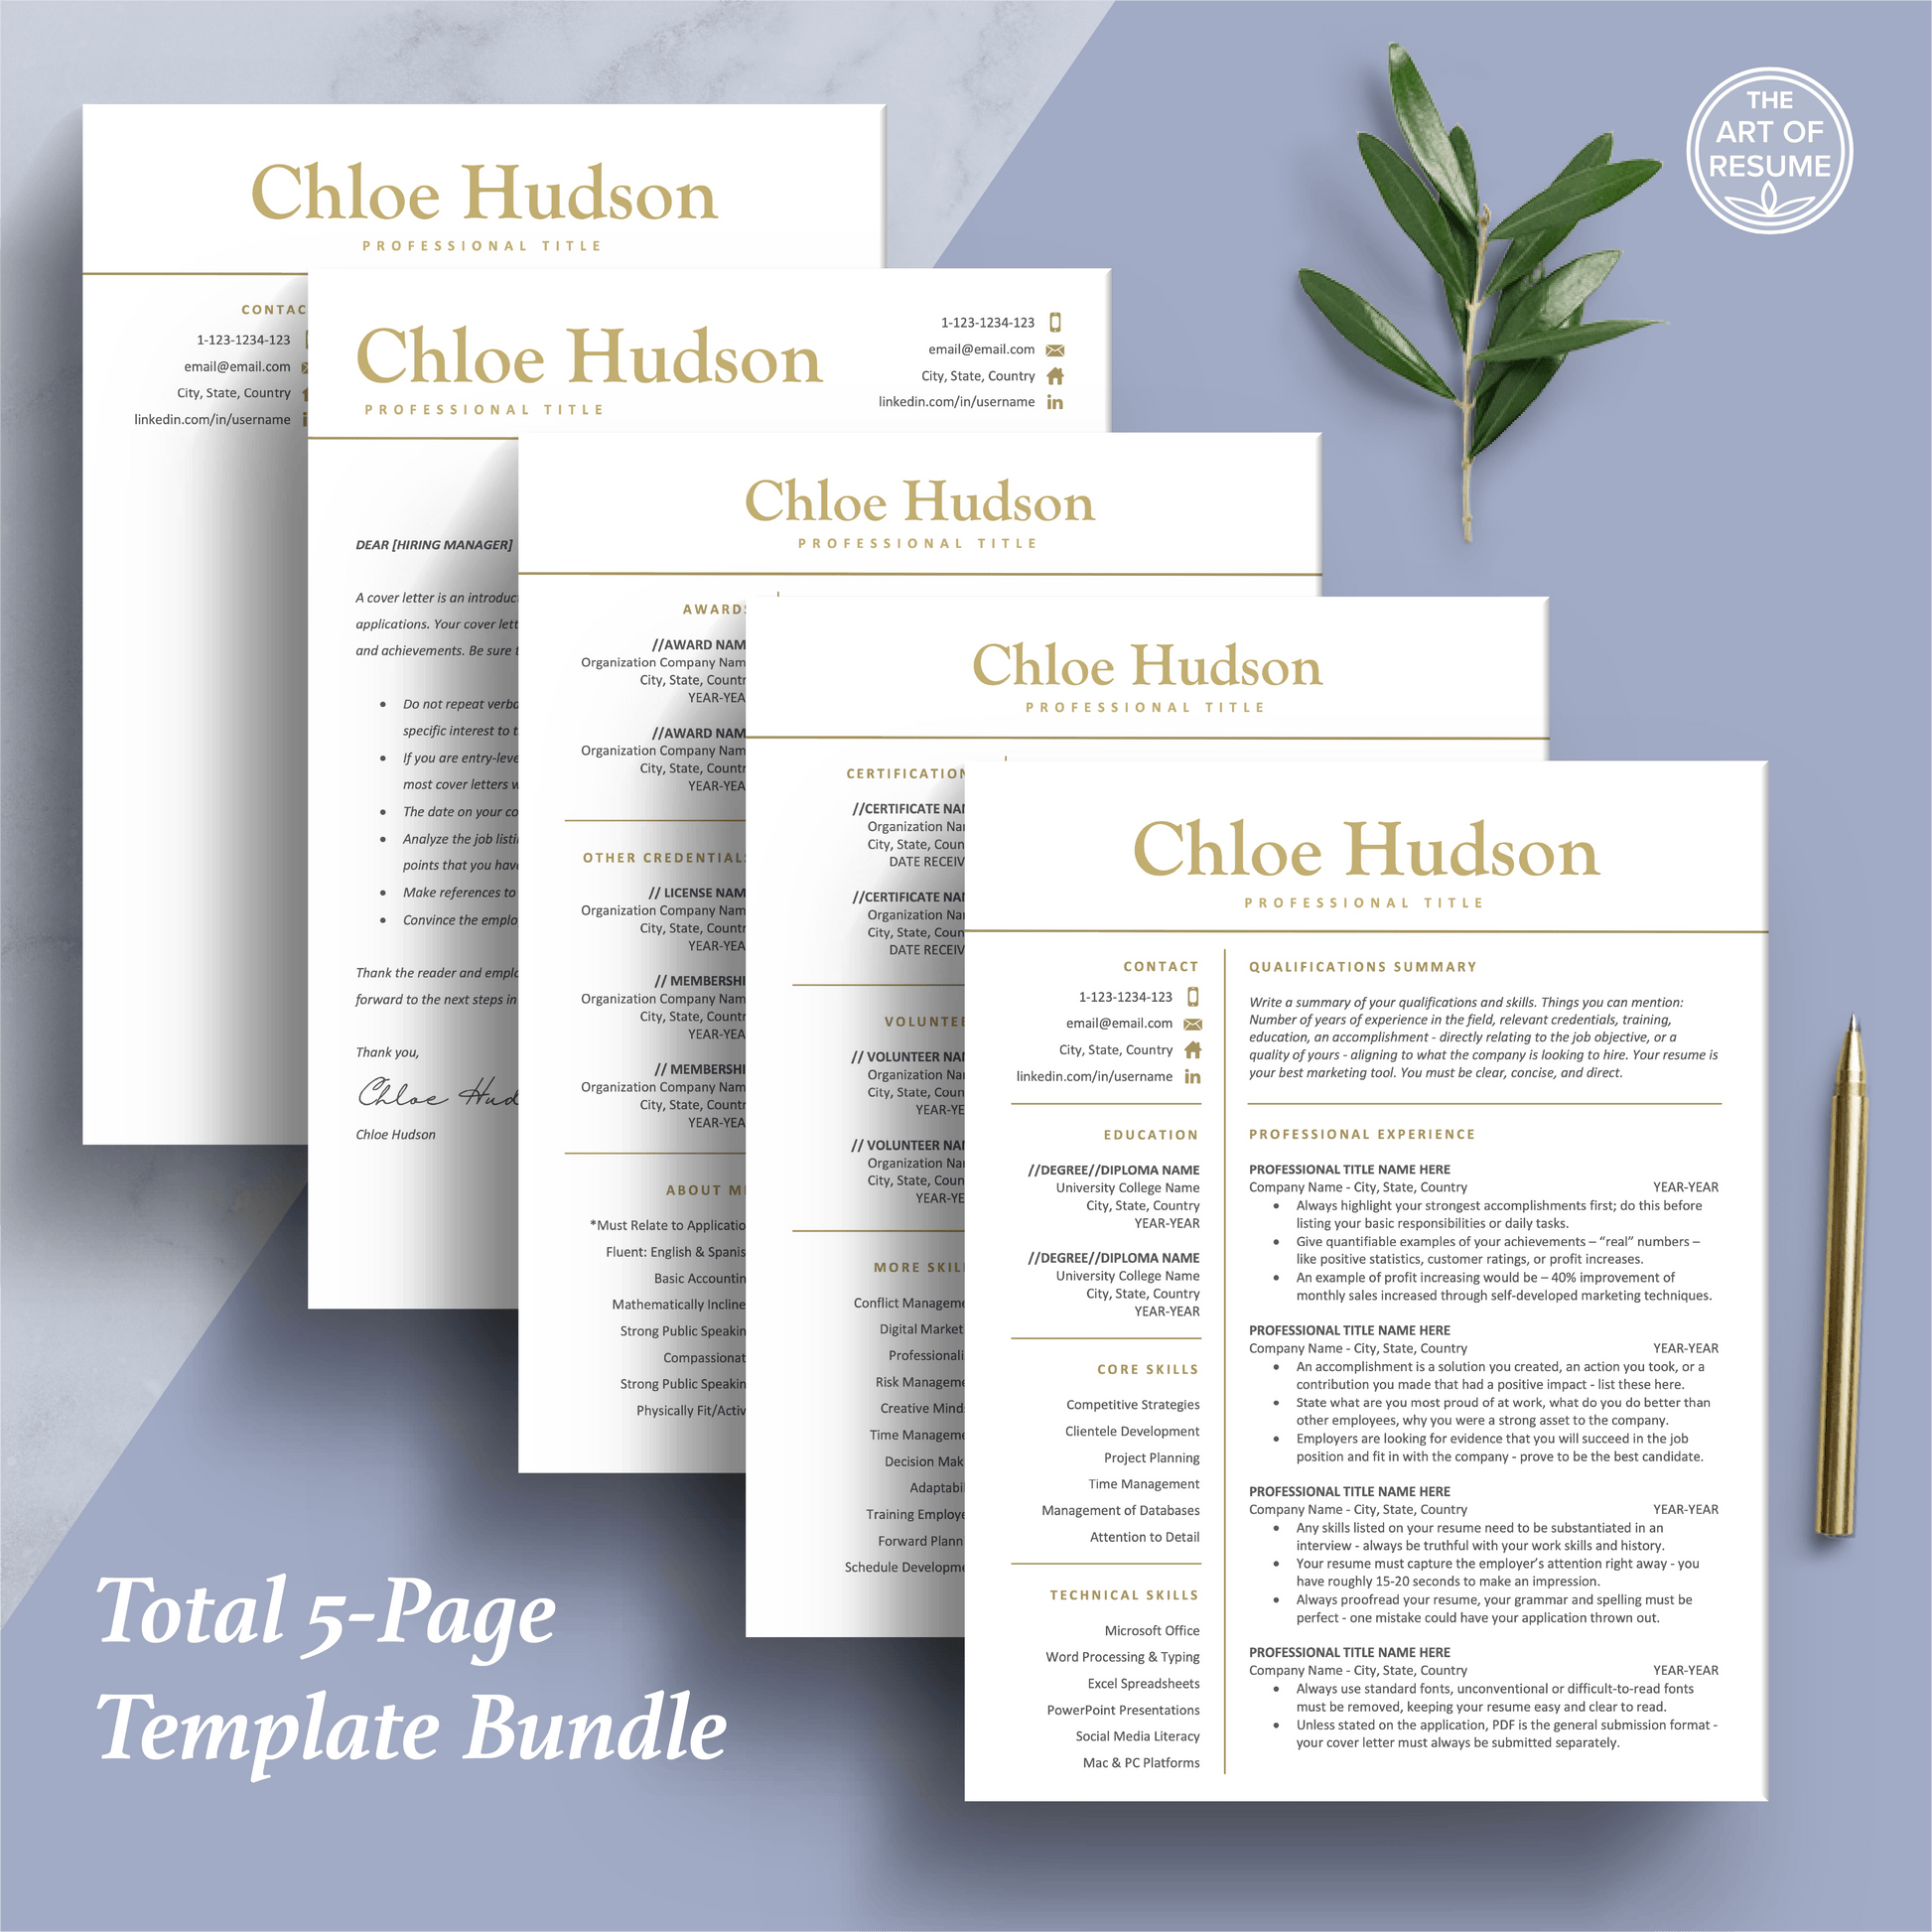 The Art of Resume Templates | Professional Simple Resume CV Design Bundle including matching cover letter and reference page